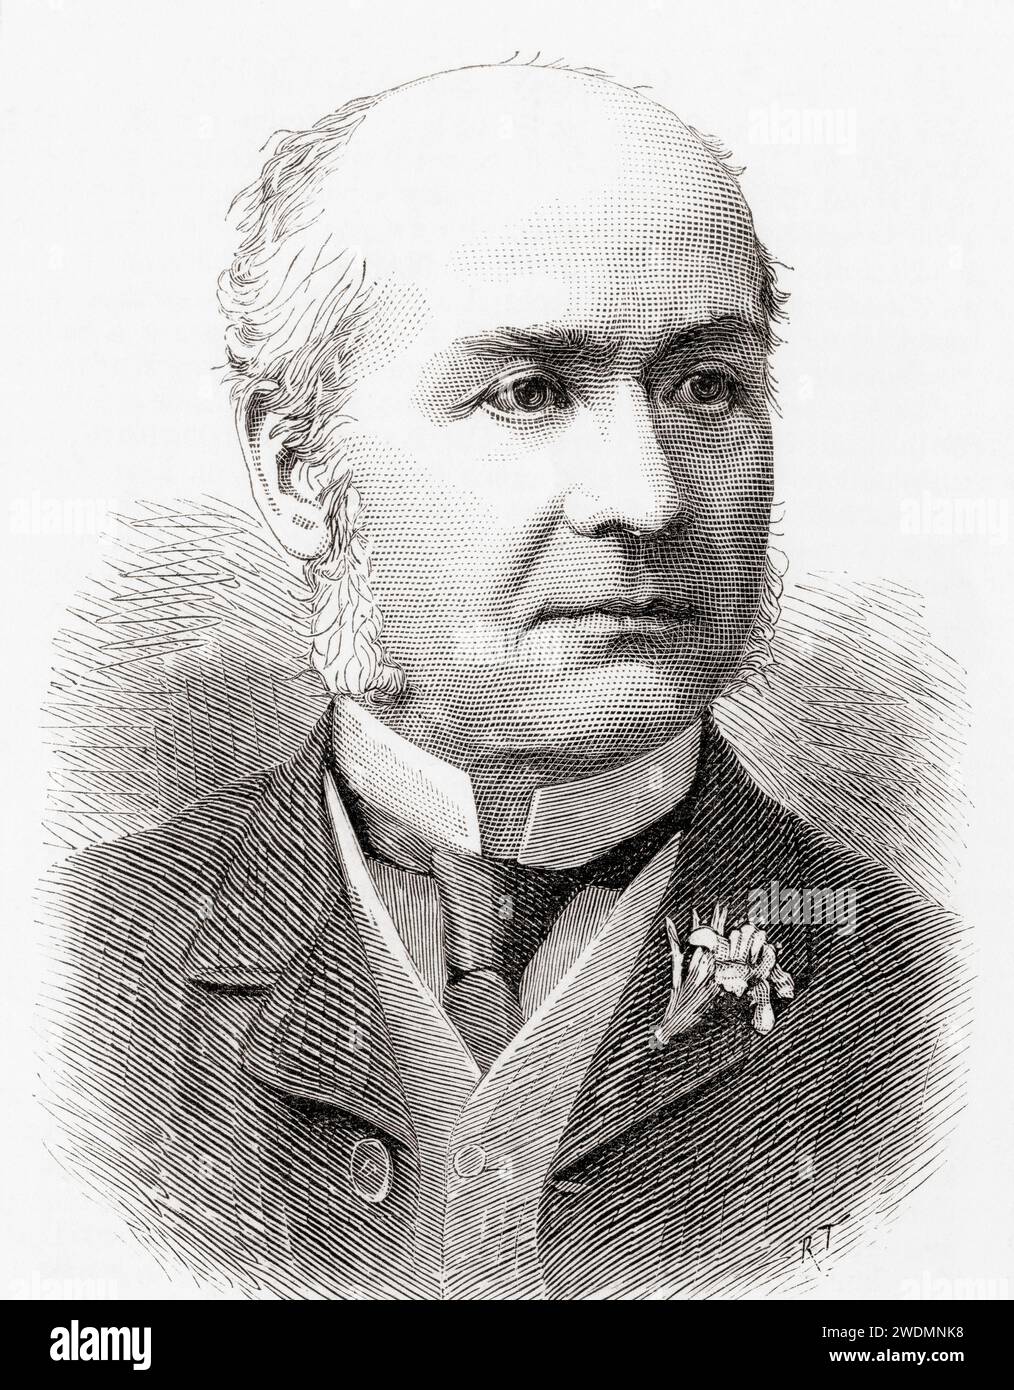 Edward Lawley Parker, Chairman of the reception committee for the visit of Queen Victoria to Birmingham in 1887, and Lord Mayor of Birmingham, England, 1891 - 1892.  From The London Illustrated News, published March 26, 1887. Stock Photo